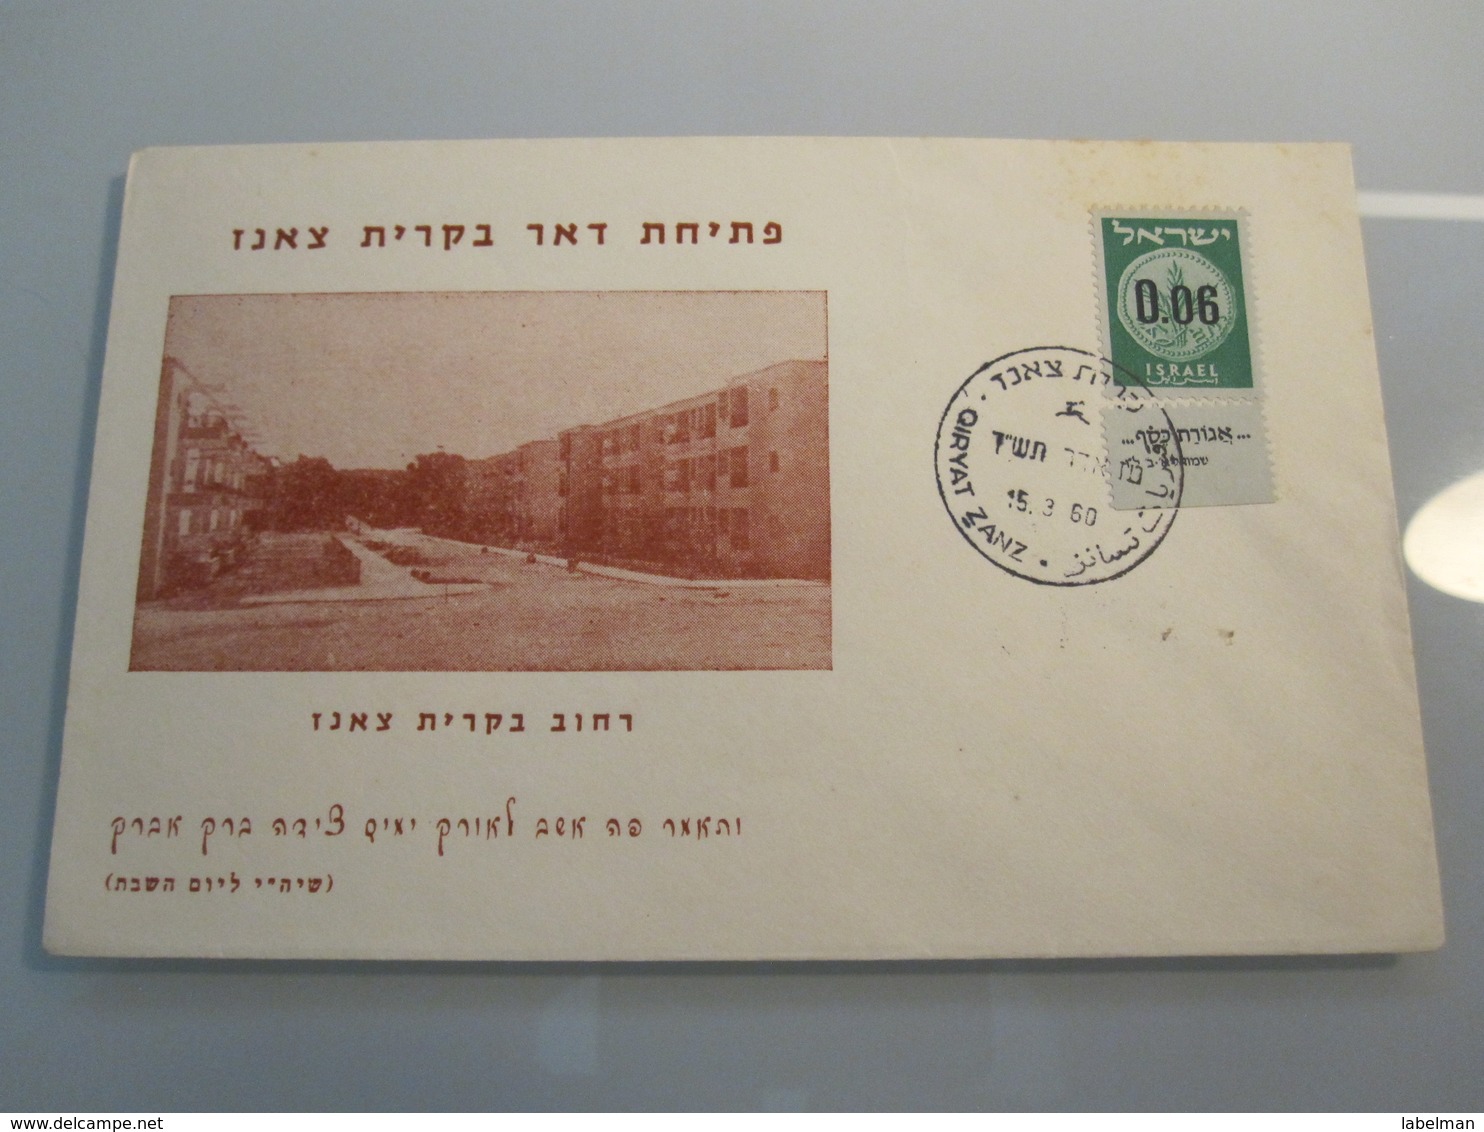 1960 POO FIRST DAY POST OFFICE OPENING KIRYAT ZANZ SANZ NETANYA MAIL STAMP COVER CACHET ENVELOPE ISRAEL - Covers & Documents